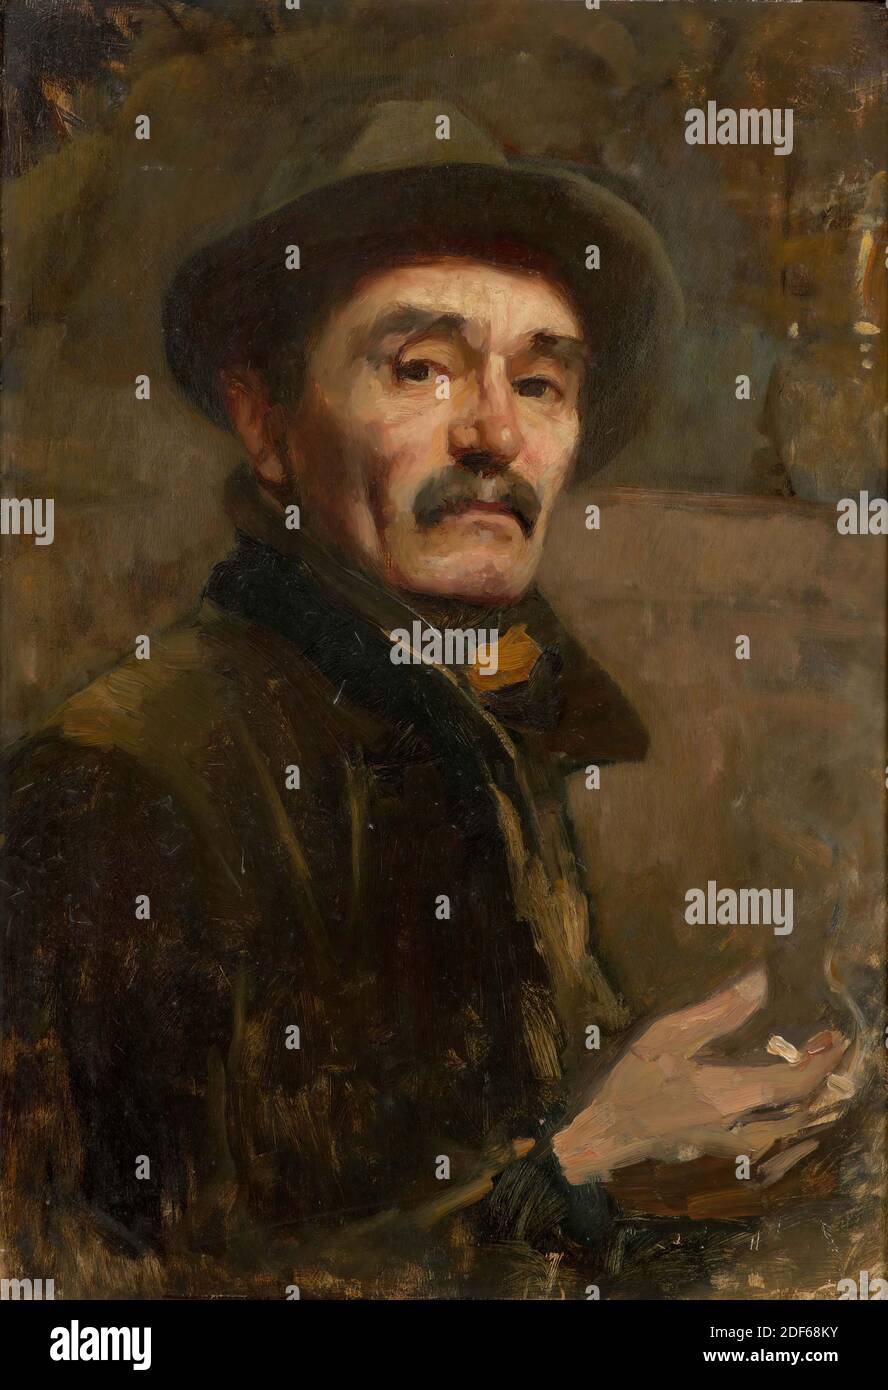 painting, Floris Arntzenius, c. 1900, cardboard, oil paint, painted, Carrier: 64 × 44 × 0.5cm (640 × 440 × 5mm), With frame: 76 × 56.5 × 5cm (760 565 × 50mm), self-portrait, man's portrait, watercolor with a portrait of a man: Gerrit Doeve. The man has a weathered face and wears a black cap, a black jacket and a dark blue polka dot scarf. Signed in the bottom right with white paint Stock Photo